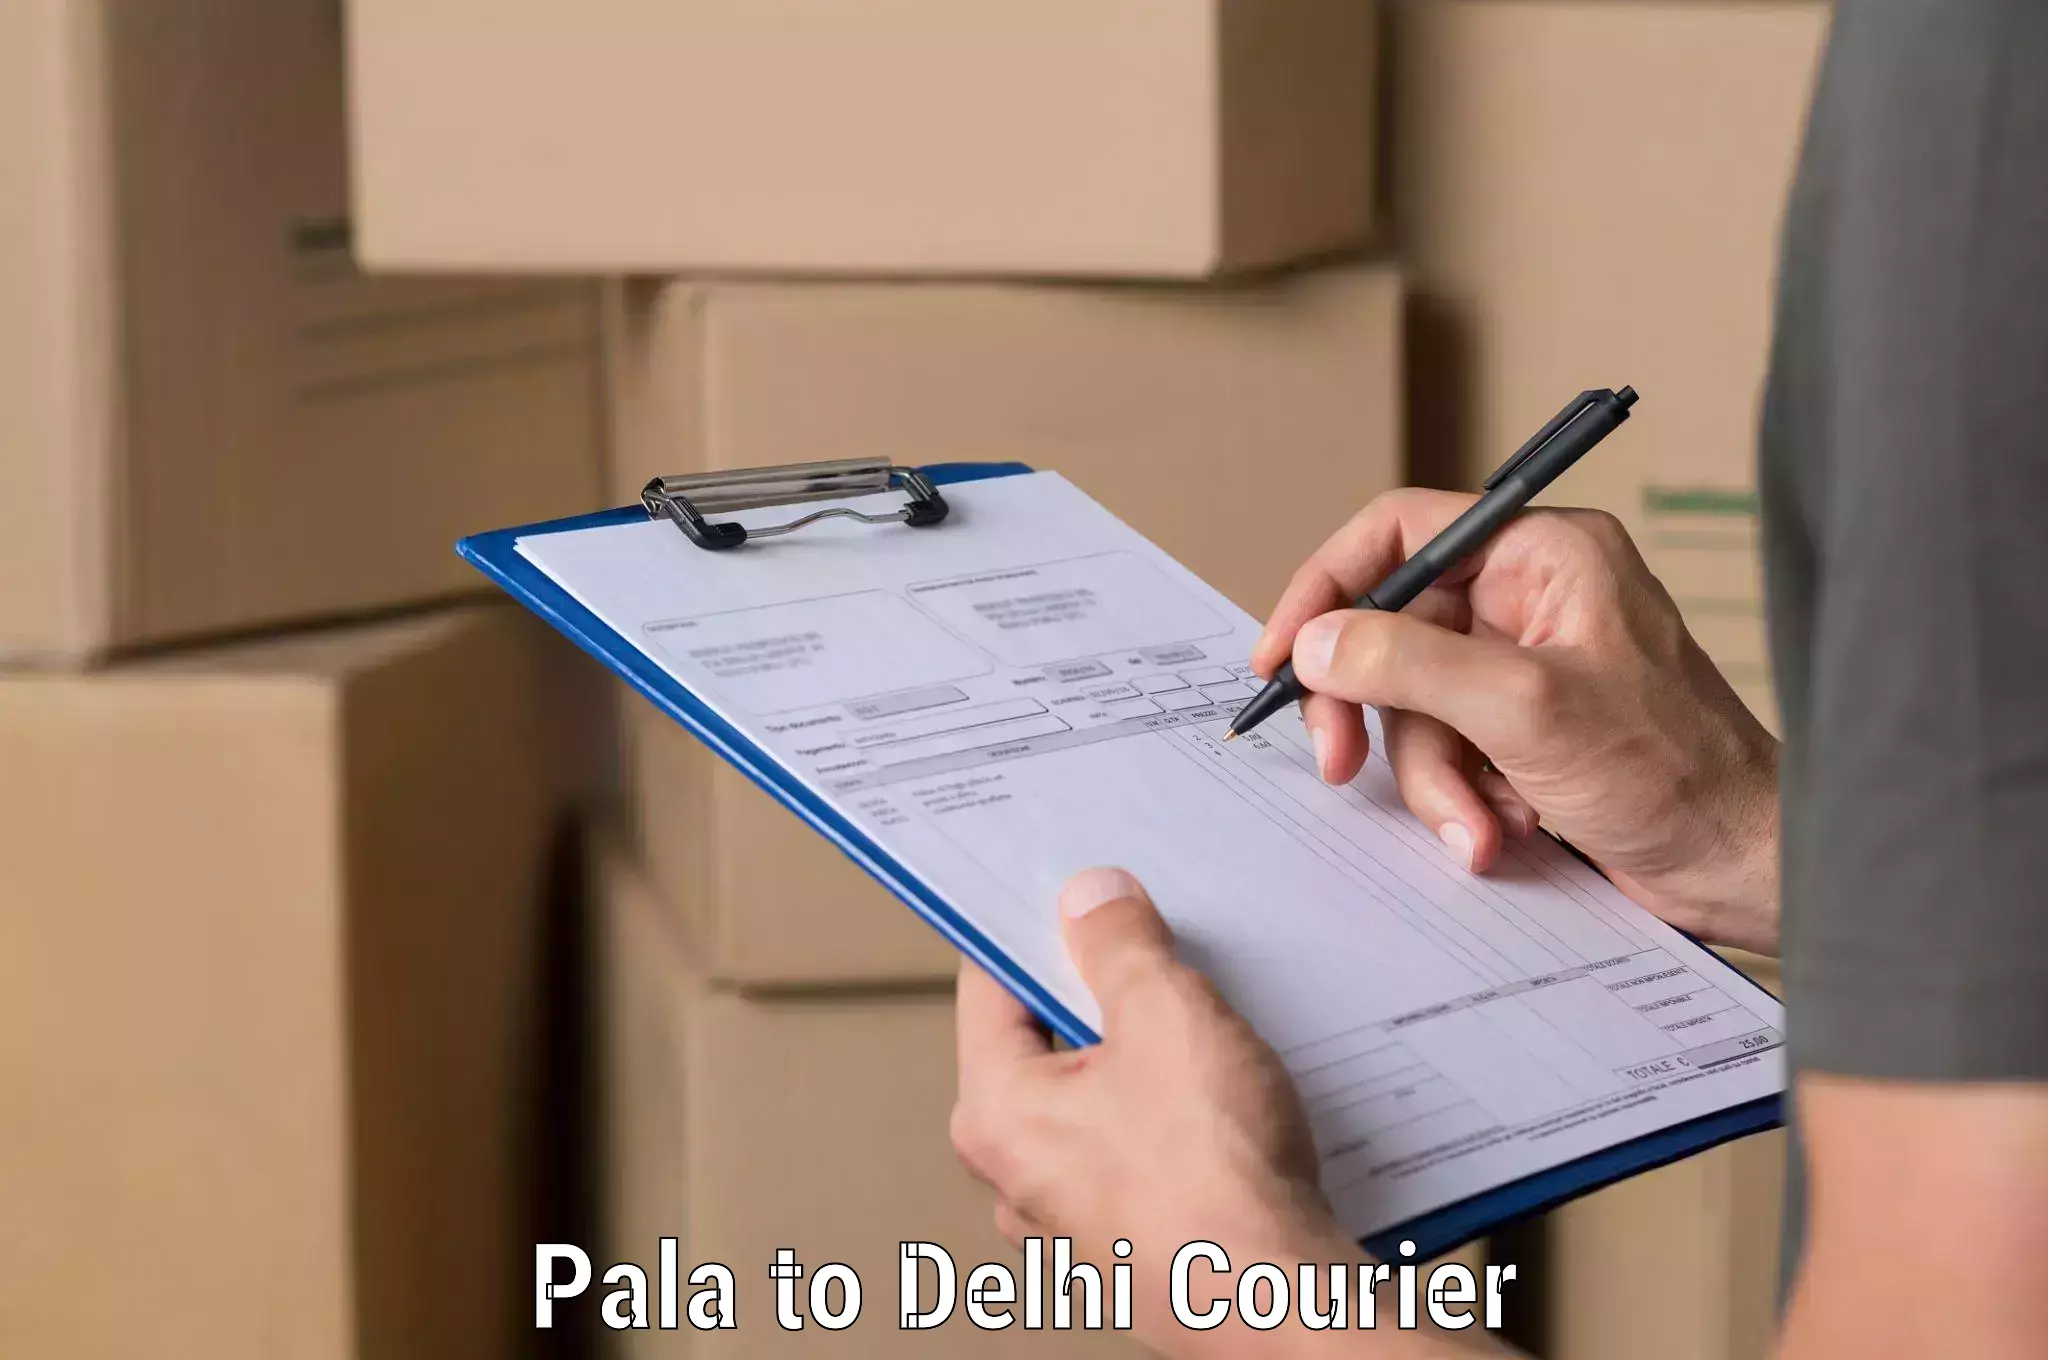 Cash on delivery service in Pala to Jawaharlal Nehru University New Delhi